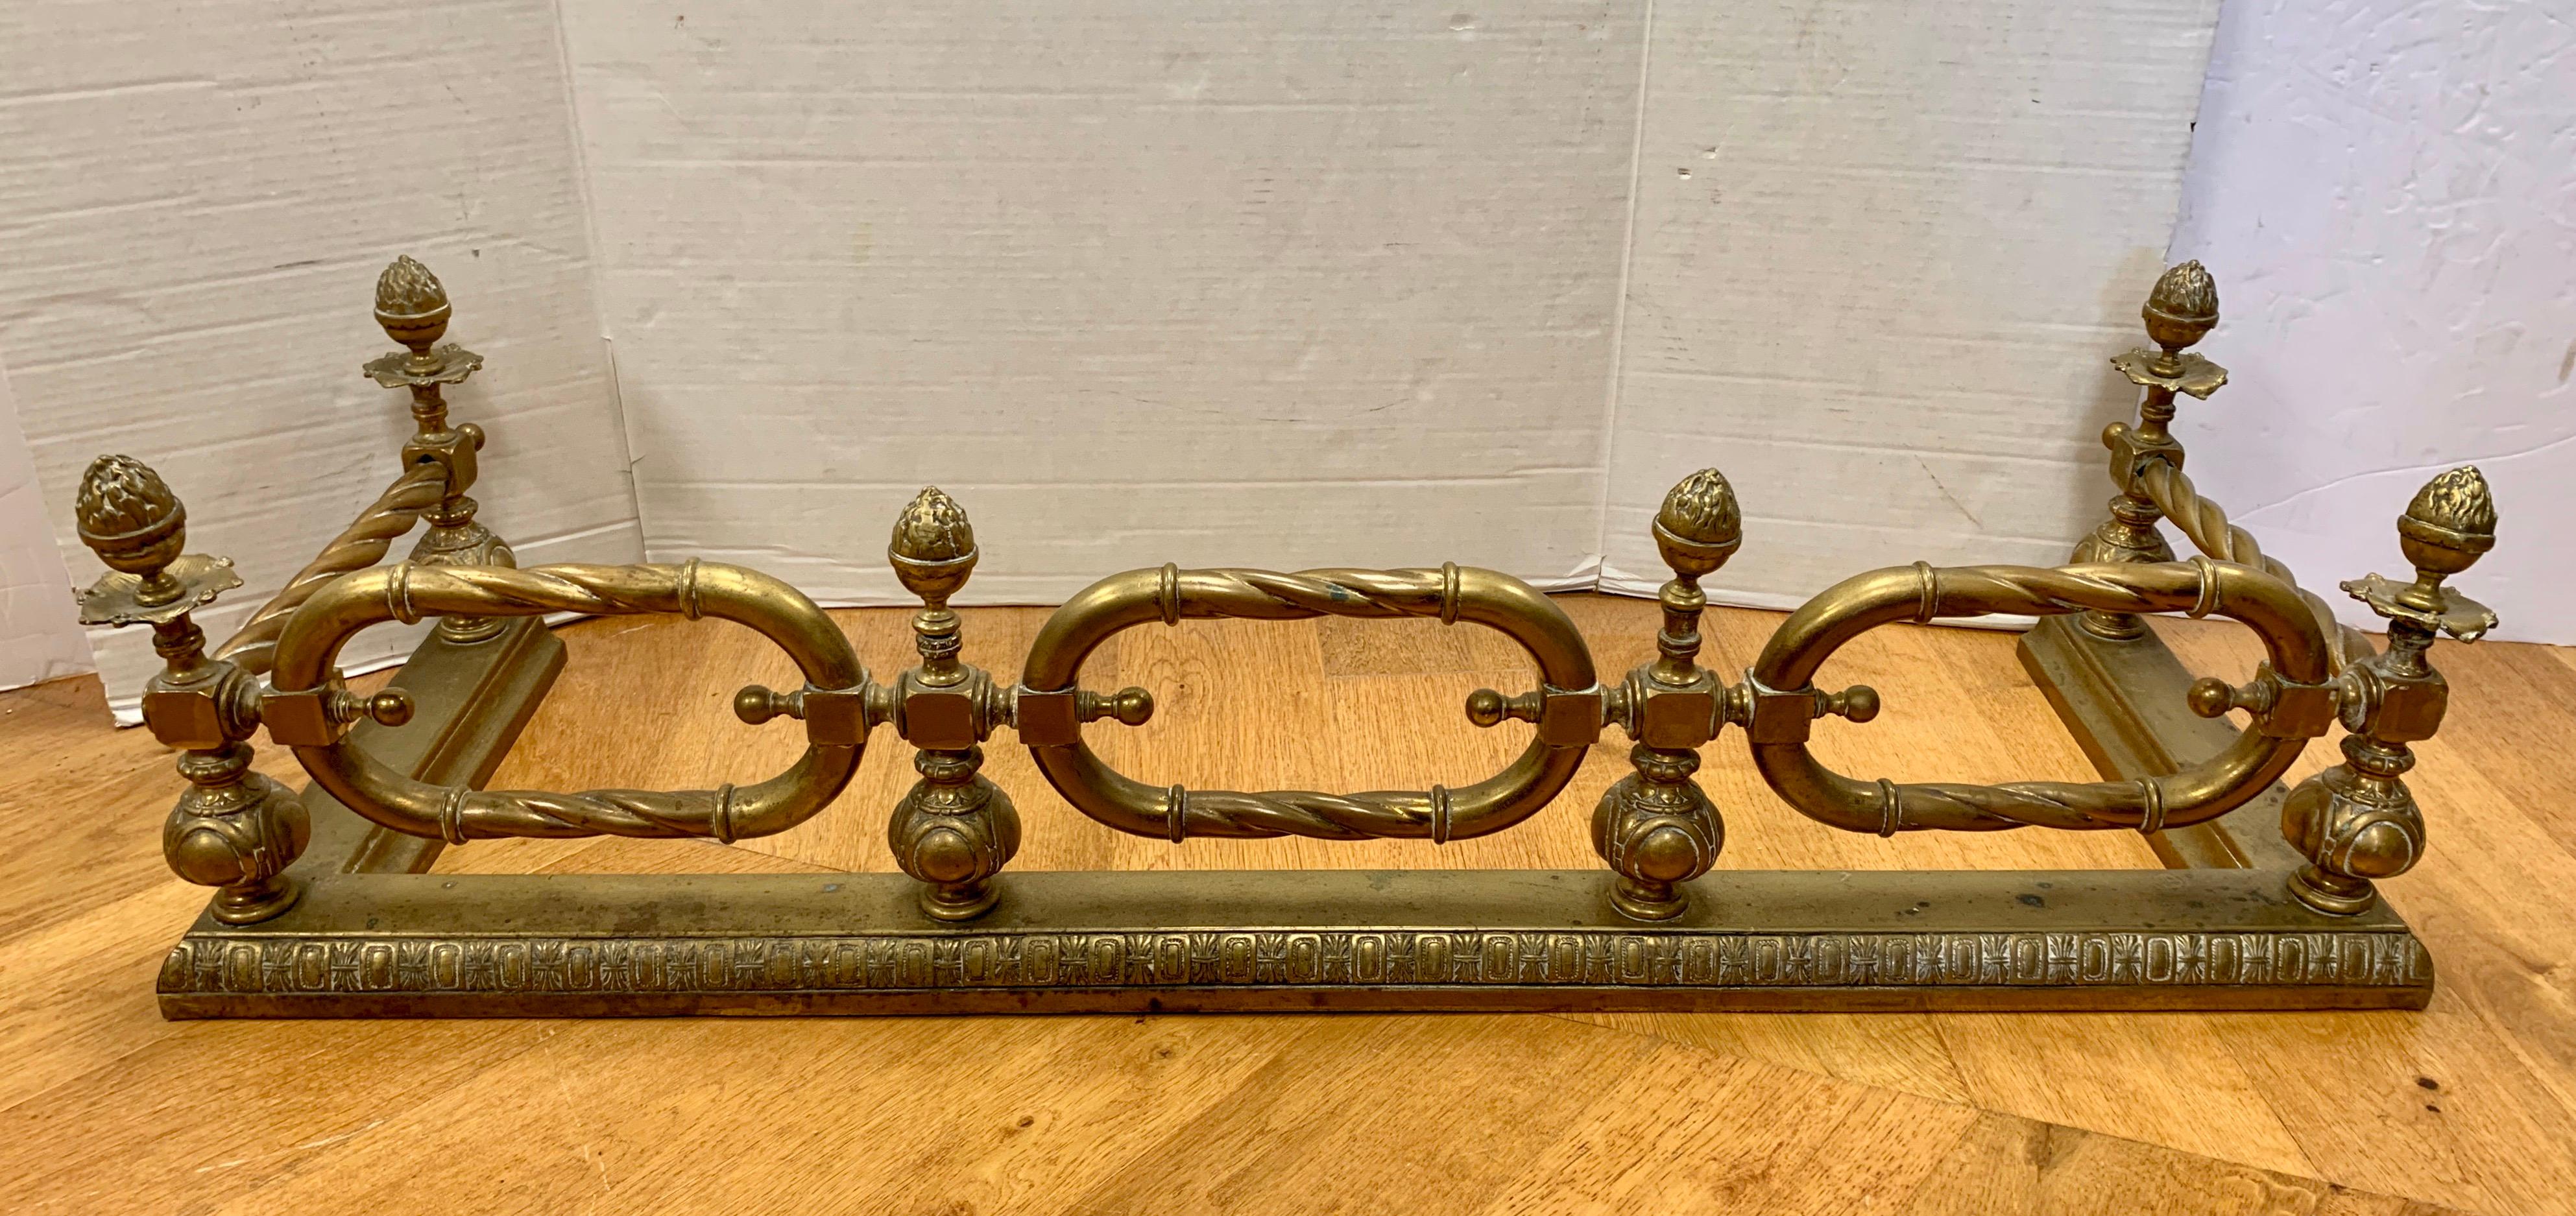 19th century very heavy brass fireplace fender resembles a large chain link of twisted brass with acorn finials in between.